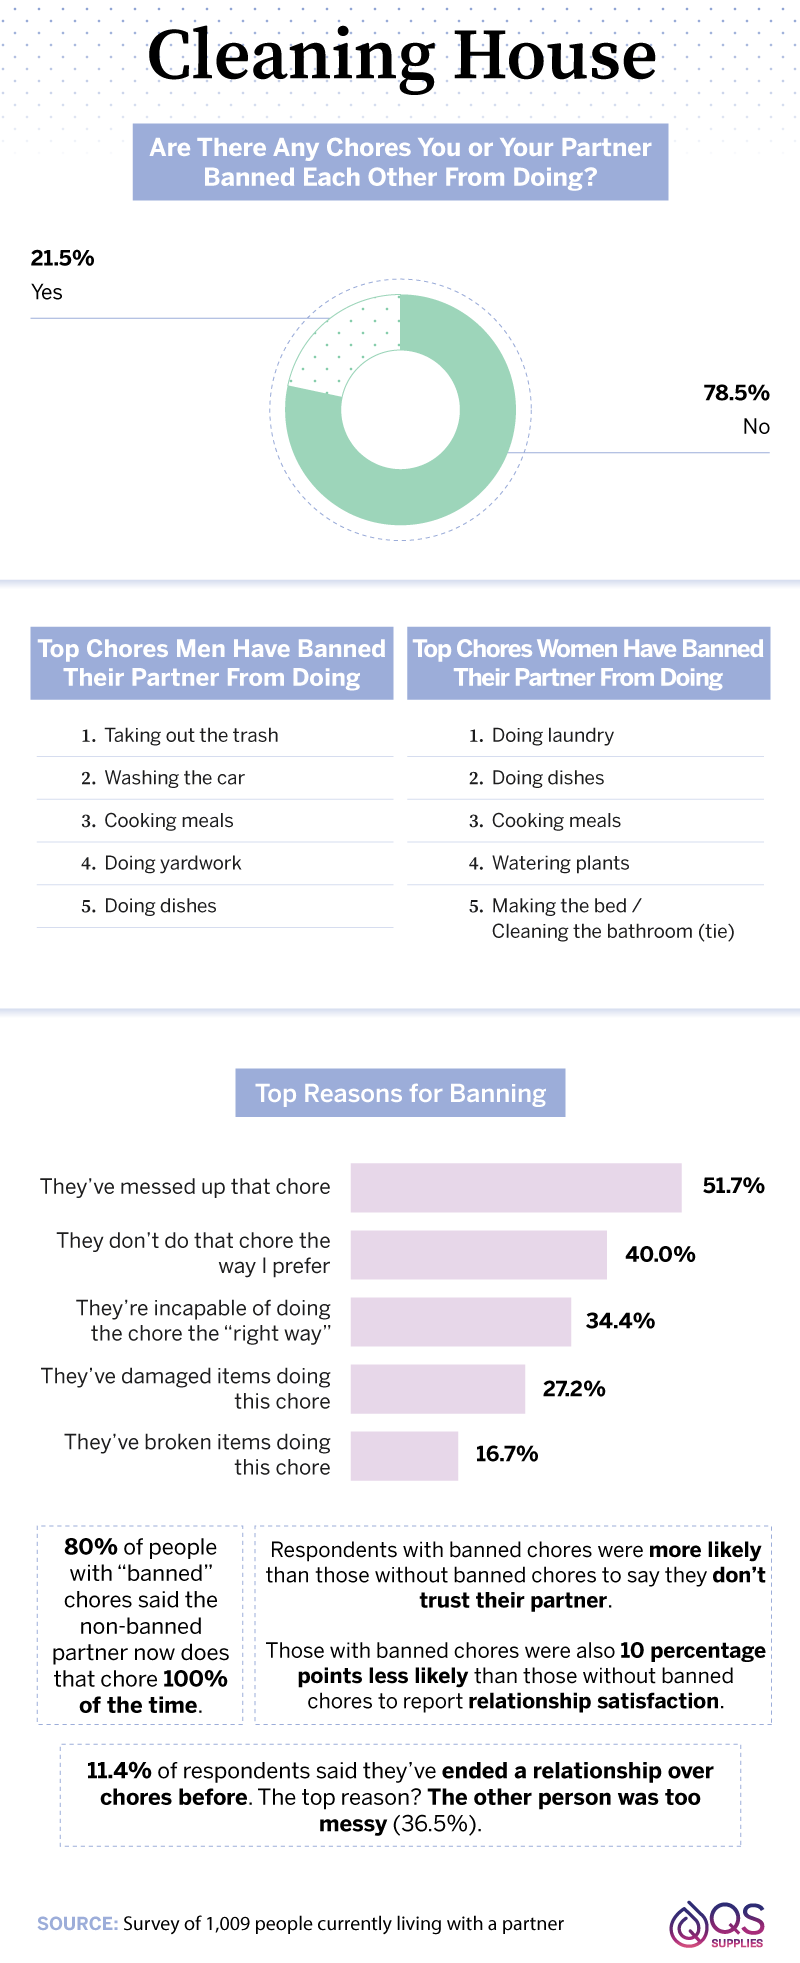 percentage-who-have-banned-their-partner-from-doing-certain-chores-and-top-chores-men-and-women-have-banned-their-partner-from-doing